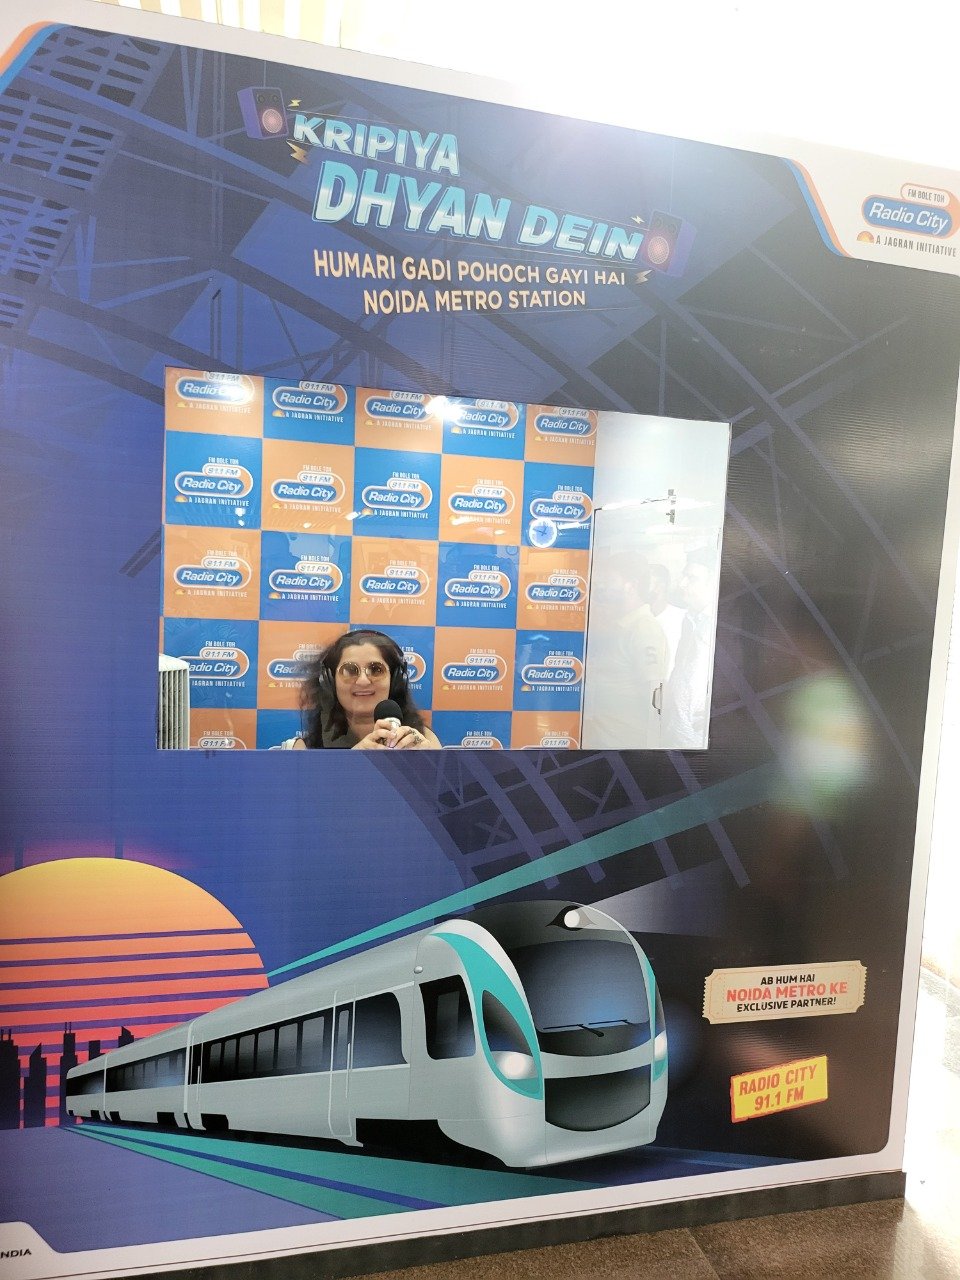 Radio City gears up to provide a daily dose of entertainment to the Noida Metro Station commuters